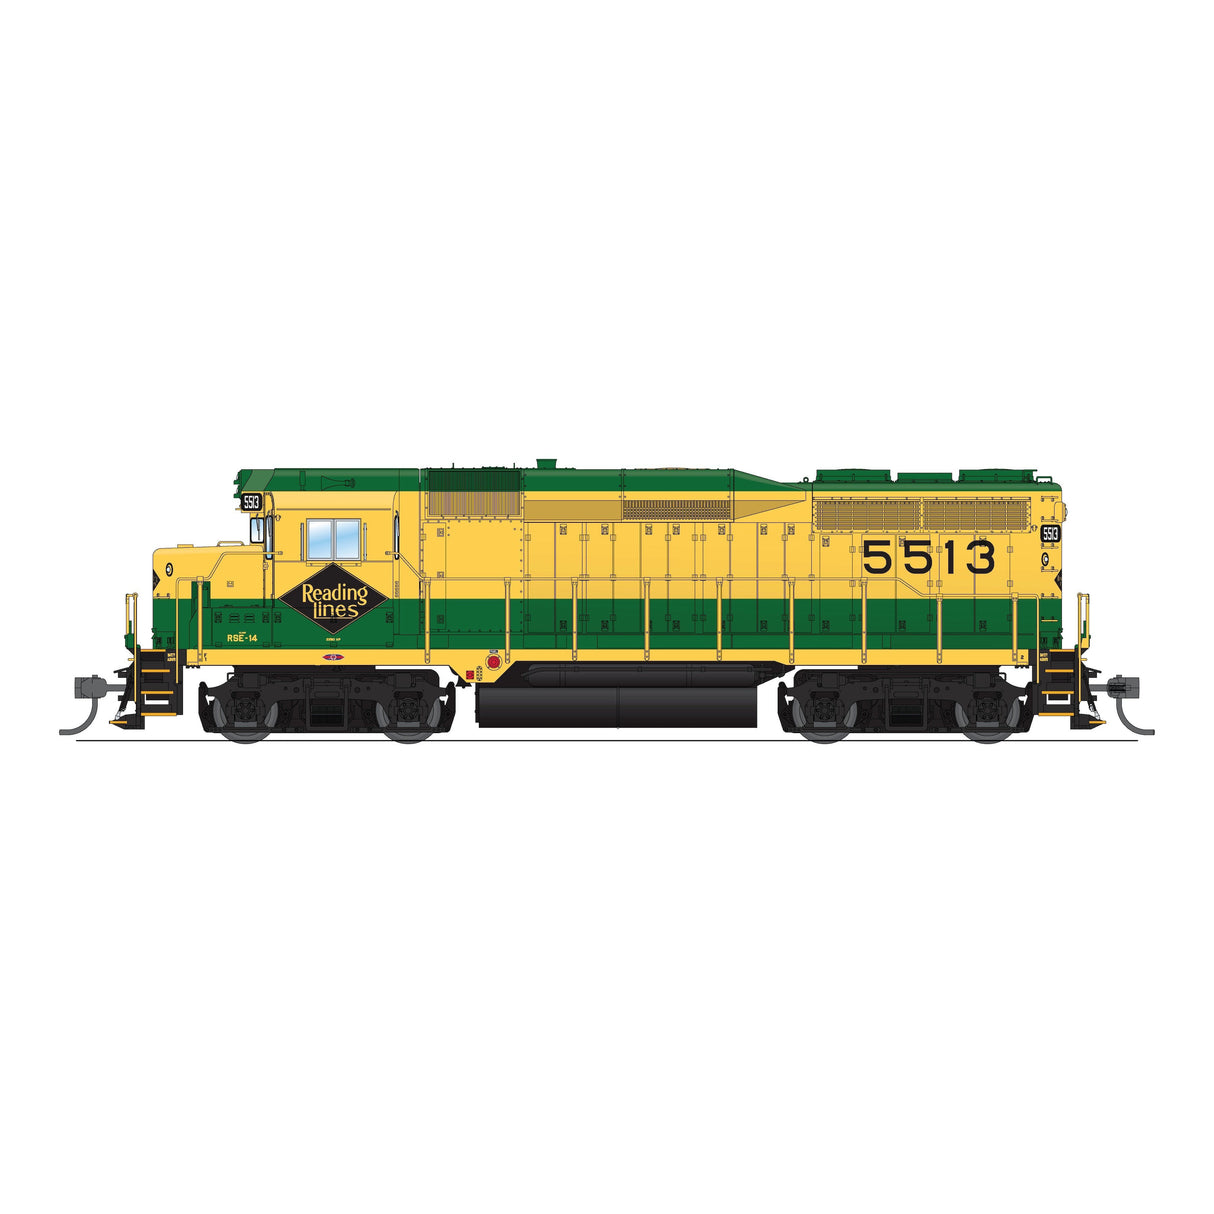 Broadway Limited HO Scale EMD GP30 RDG 5520 Green & Yellow Paragon4 Sound/DC/DCC HO